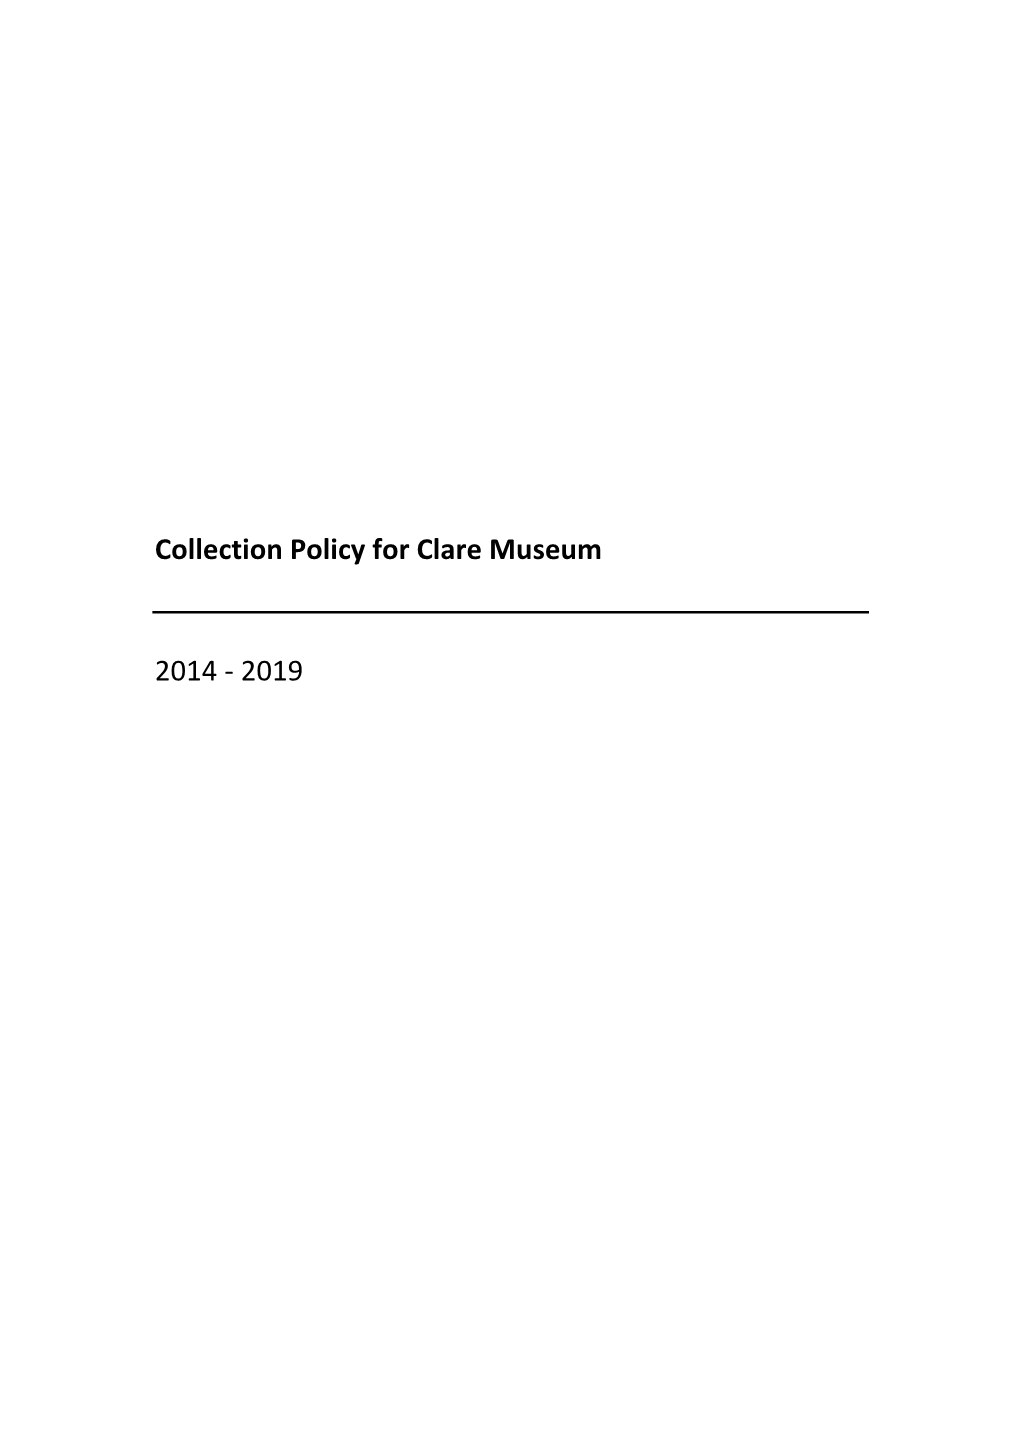 Collections Policy for Clare Museum